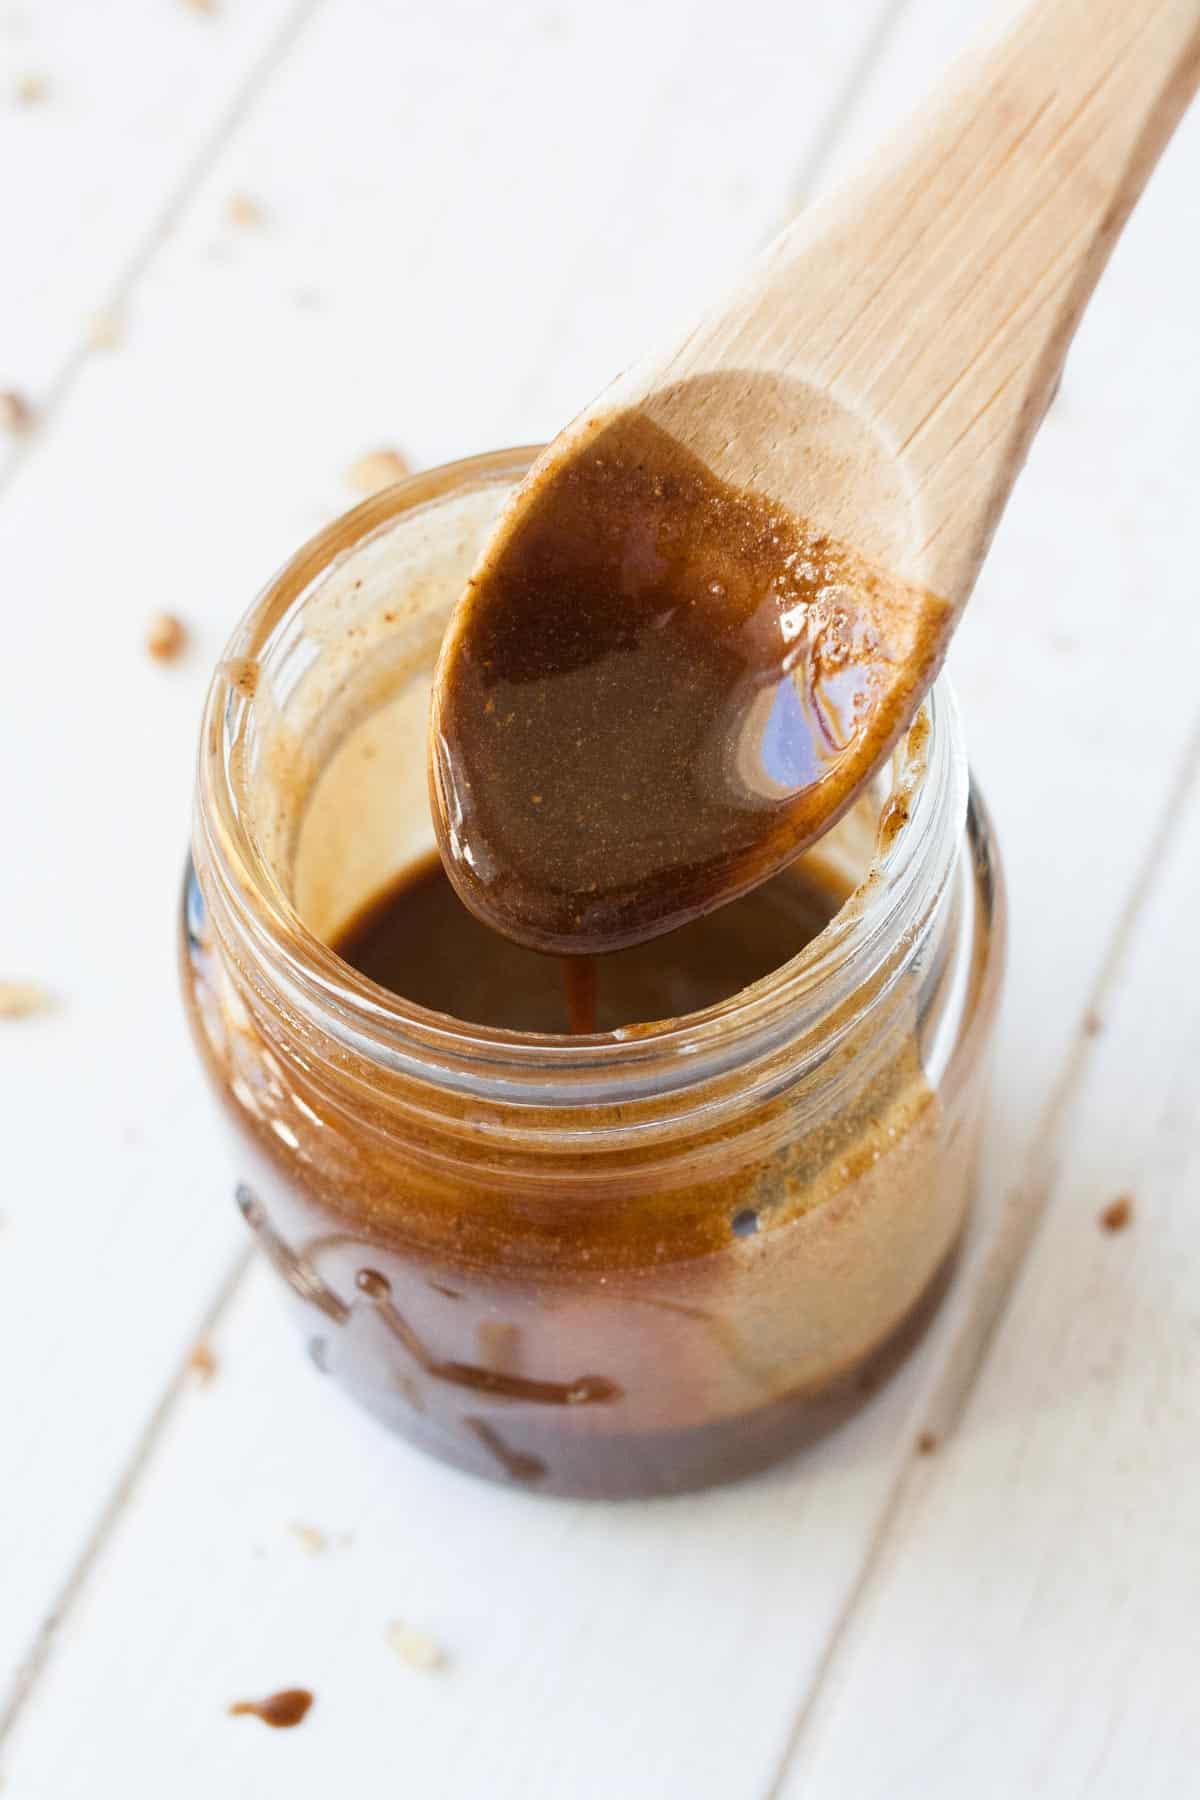 Wooden spoon dipping into a glass jar of brown glaze